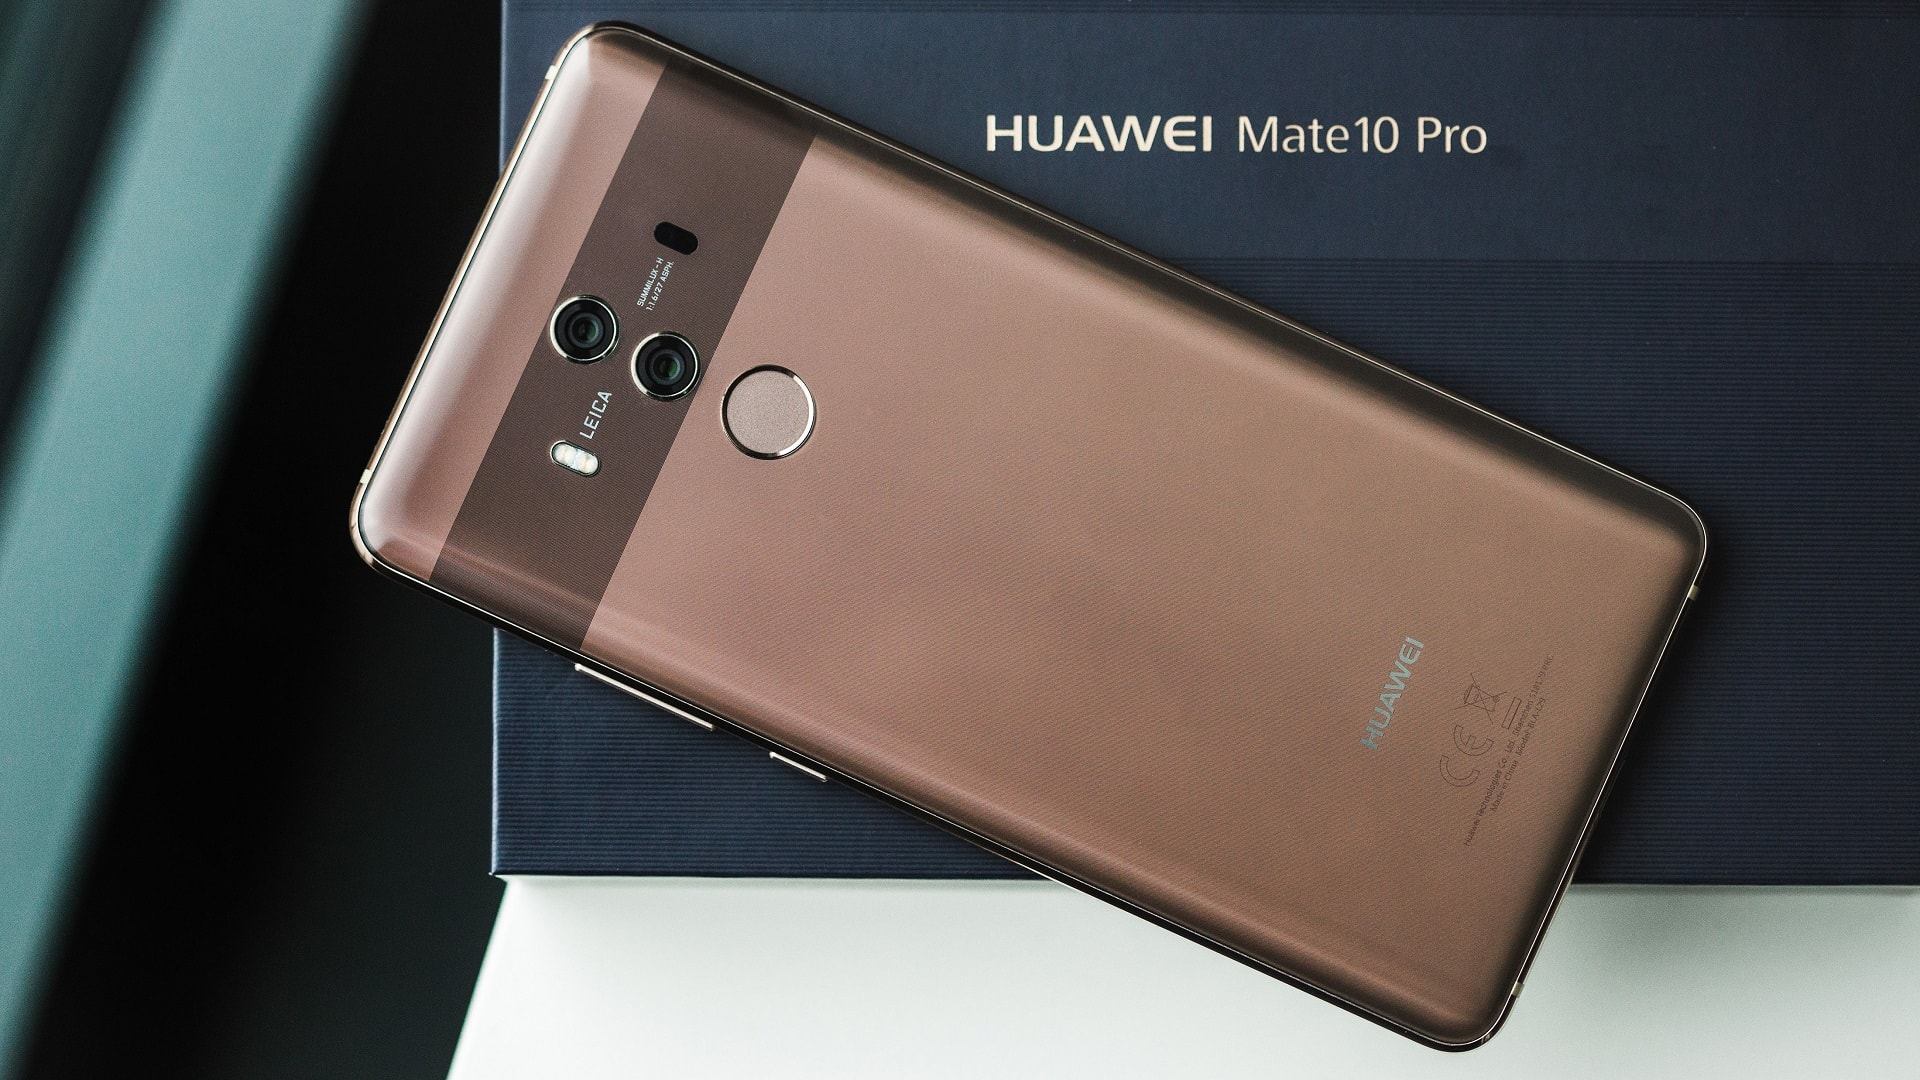 AndroidPIT huawei mate 10 pro review 1833 min